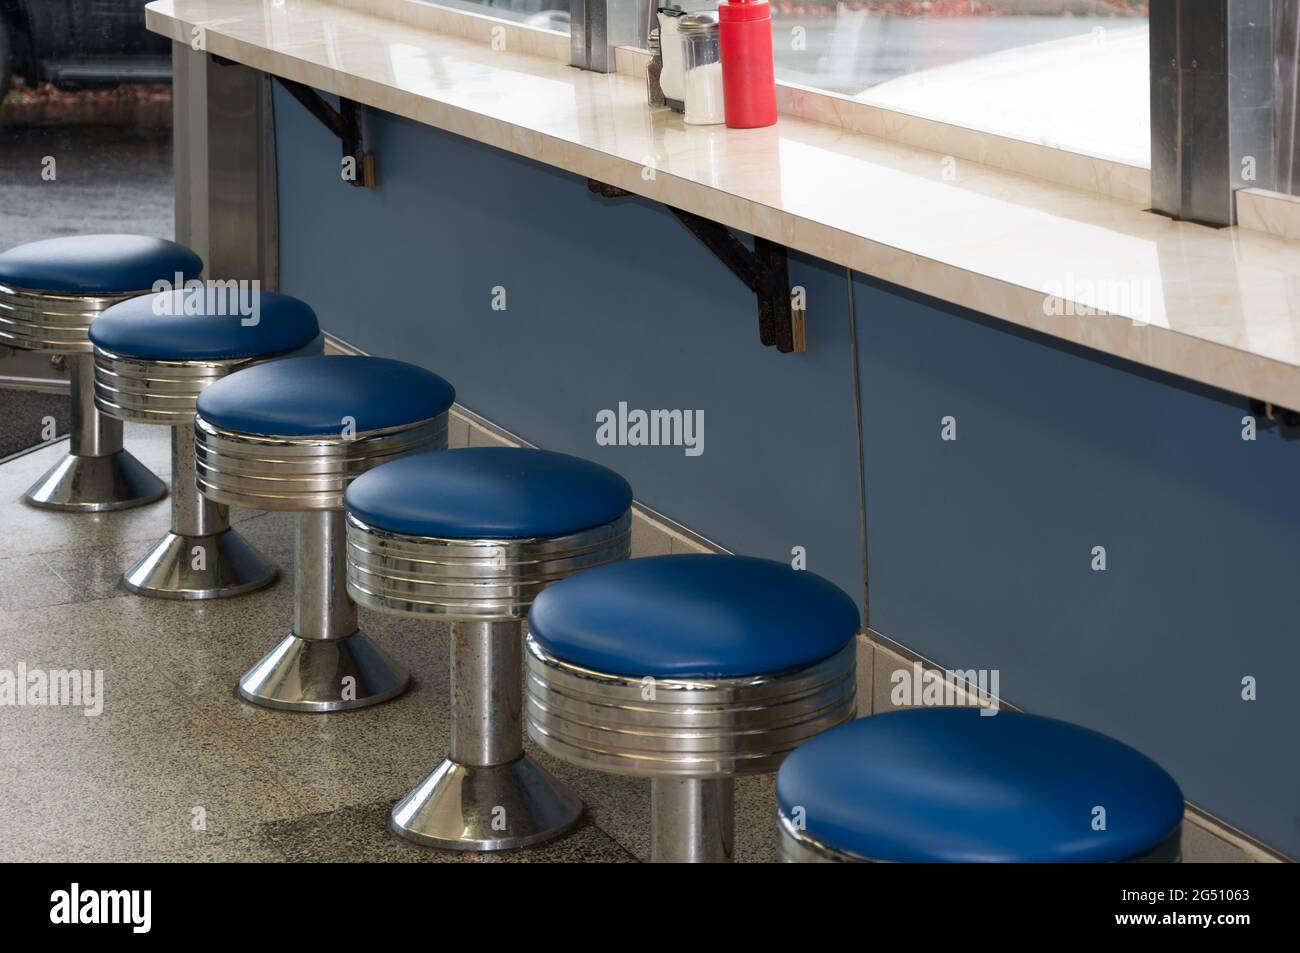 Vintage diner stools inside an old diner from the 1950's with blue vinyl seats. Stock Photo